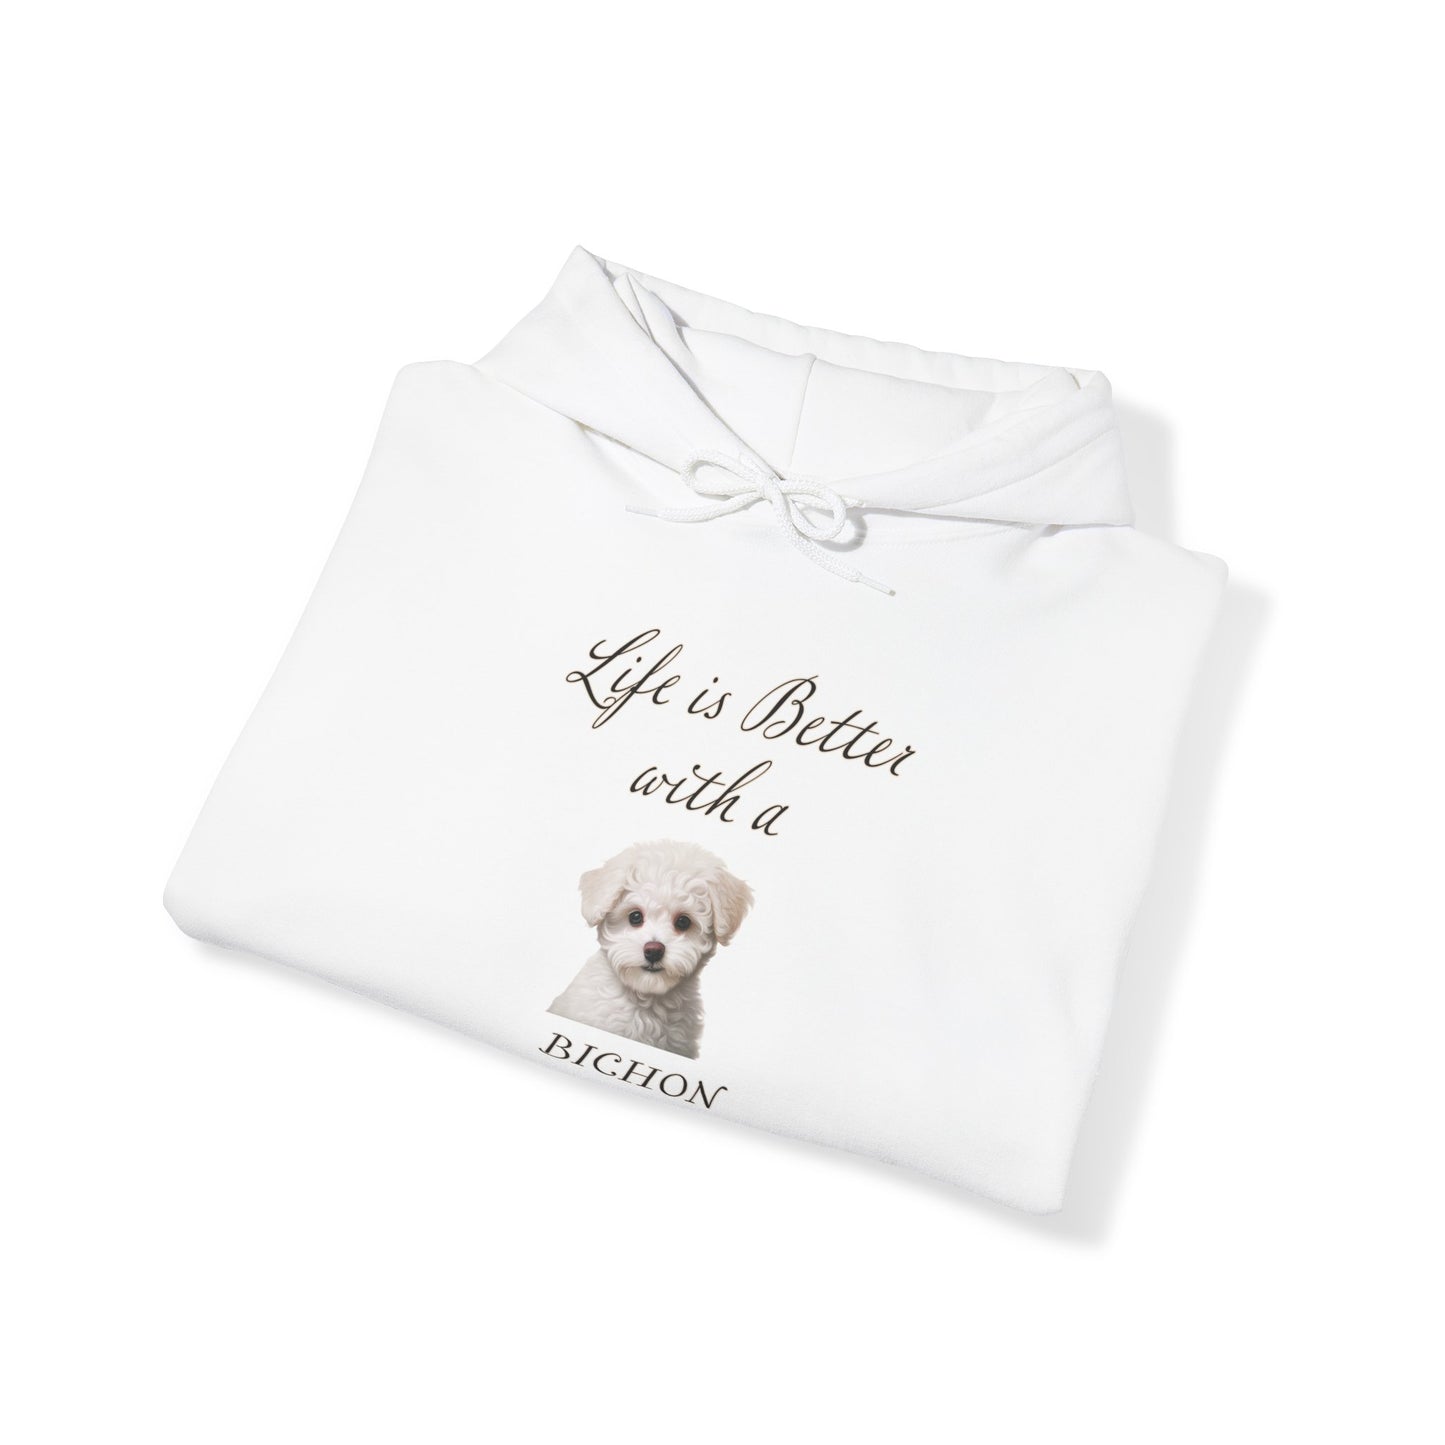 Bichon Frise Hoodie - Life is Better with a Bichon Frise Hooded Dog Mom or Dog Dad Sweatshirt, gift for Dog Mom